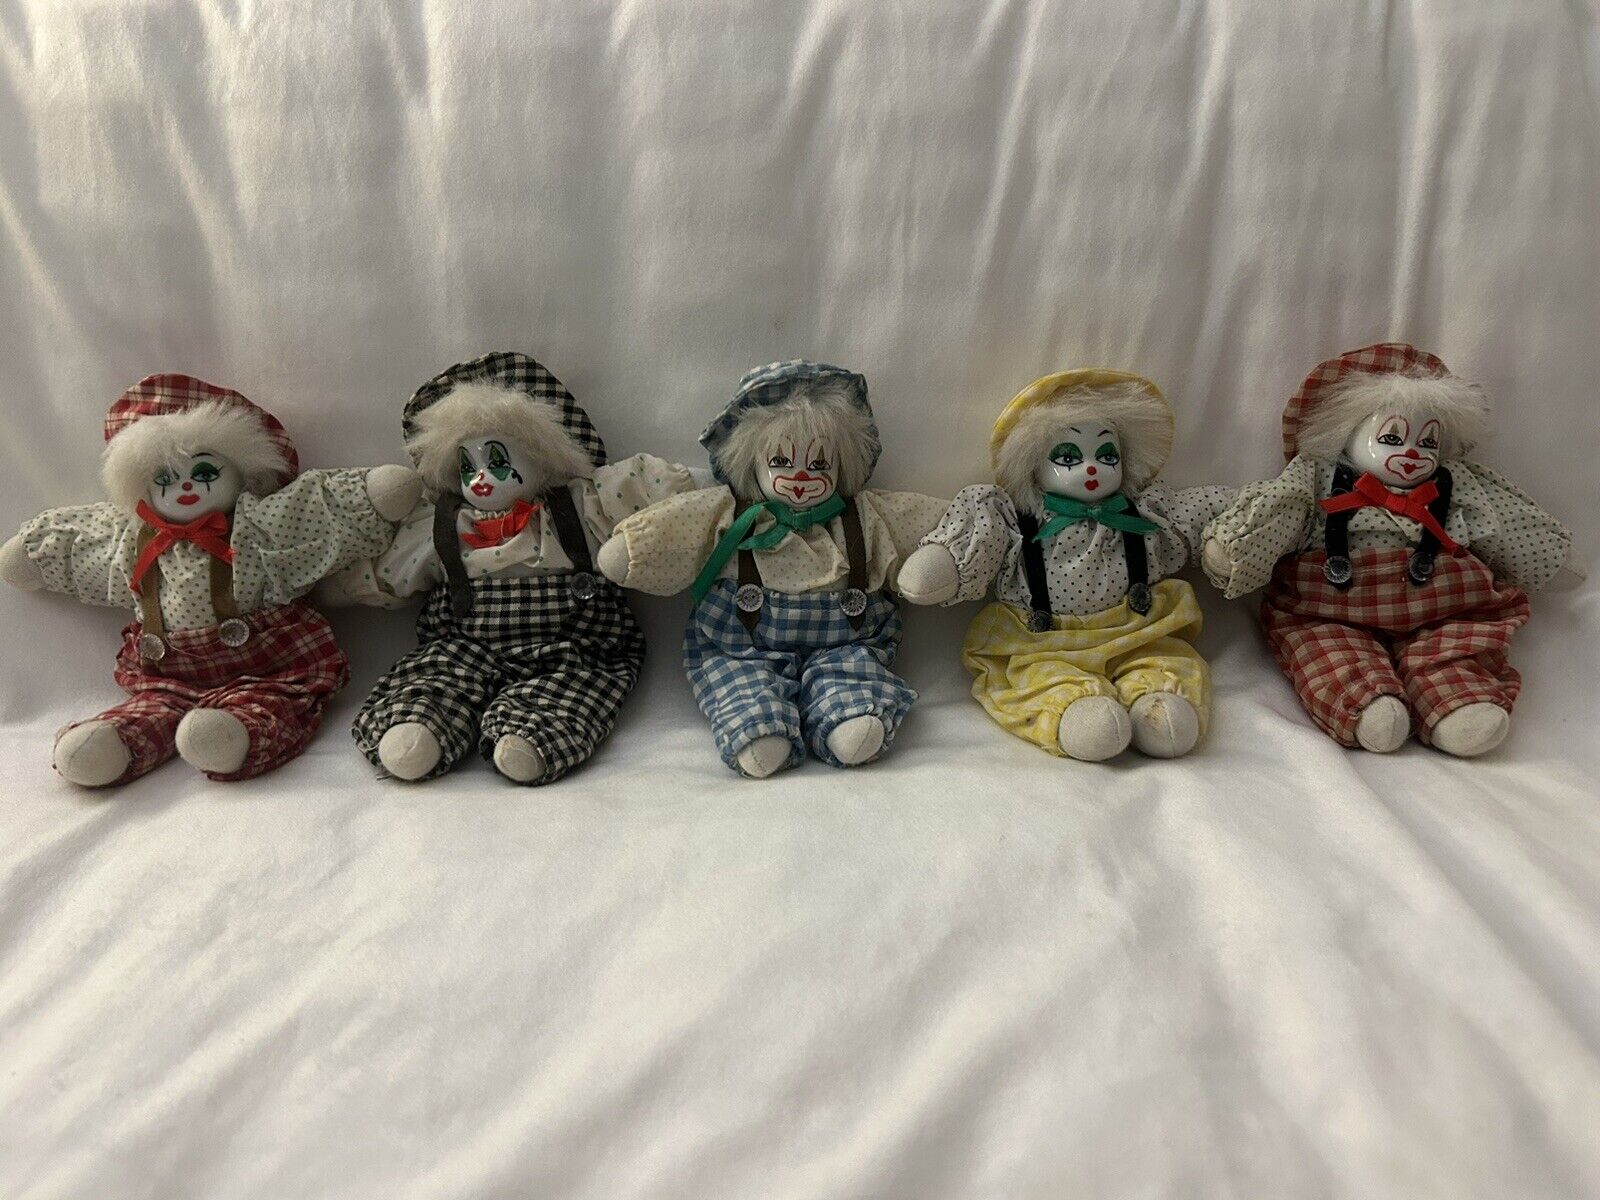 Set Of 5 Artmark Chicago LTD Porcelain Clowns With Overalls And White Hair